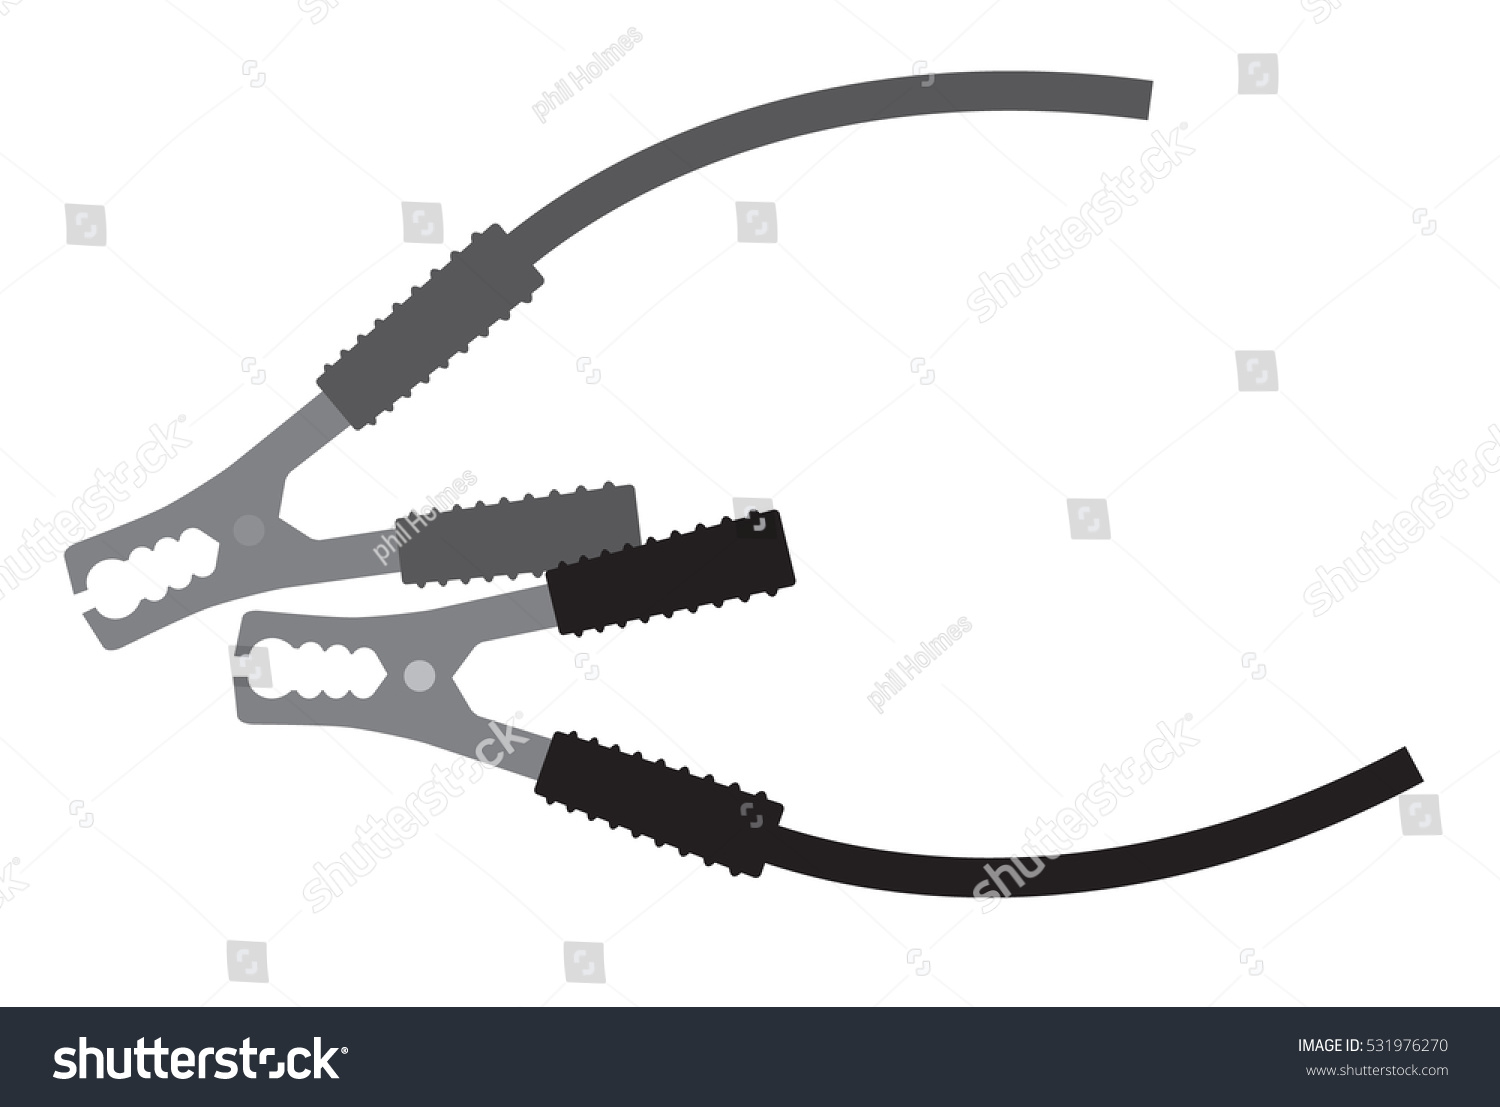 SVG of Car jumper power cables. Black wire shown in greyscale svg